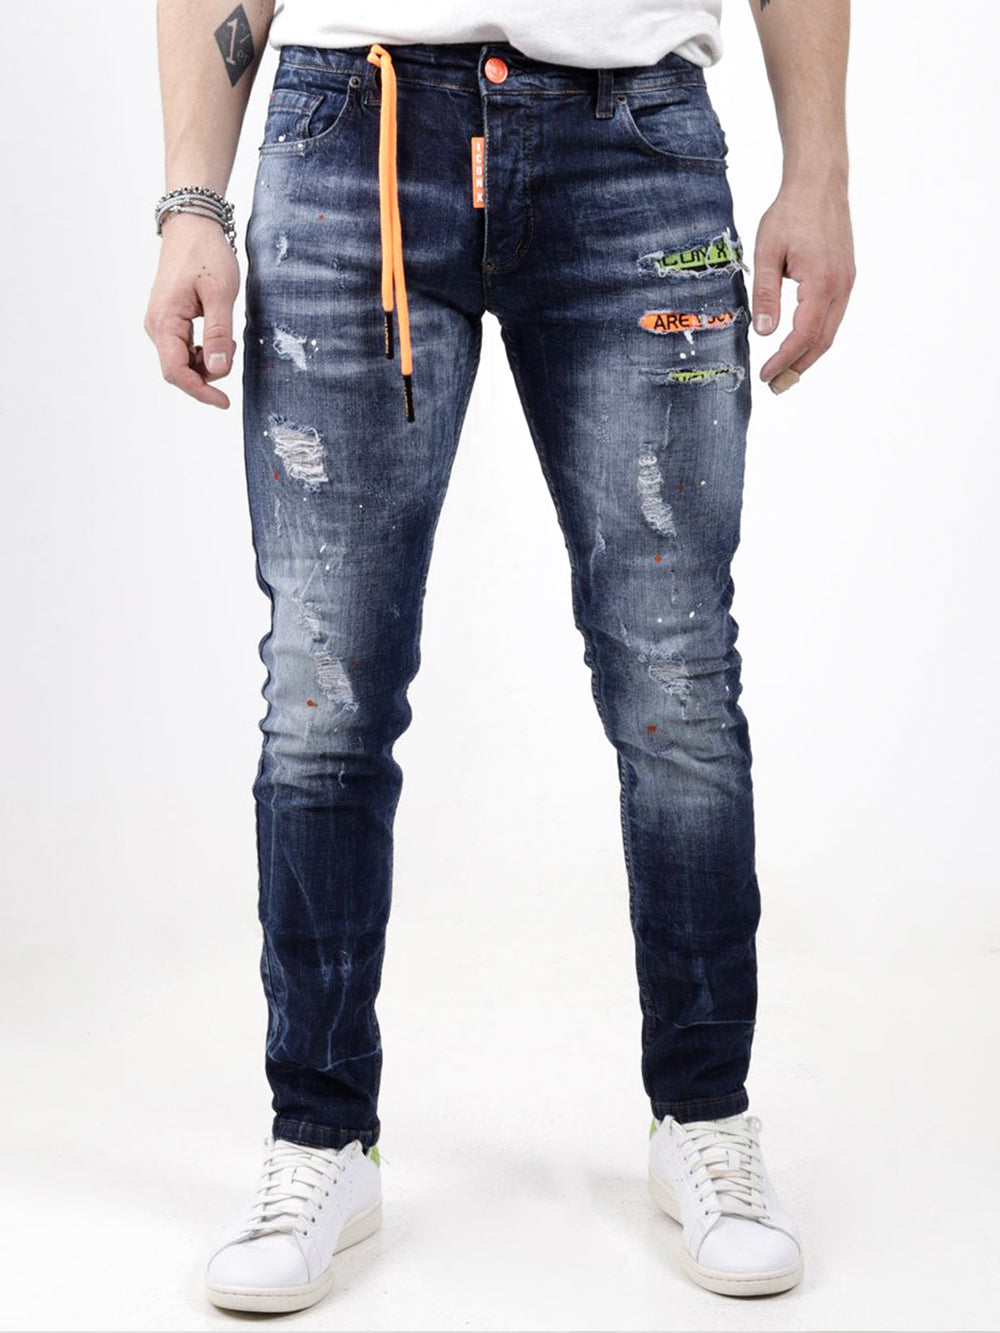 A man wearing ripped jeans with a GRAPHITE zipper.